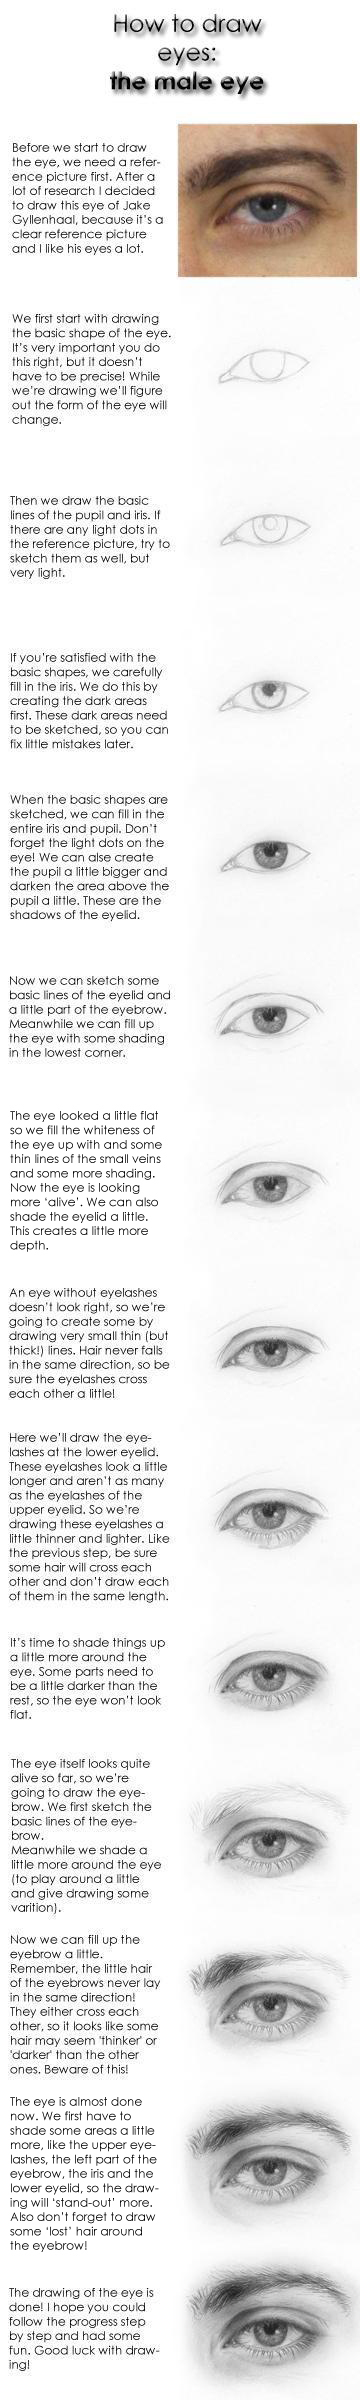 How To Draw Male Eyes | Drawing and Painting Tutorials | Scoop.it